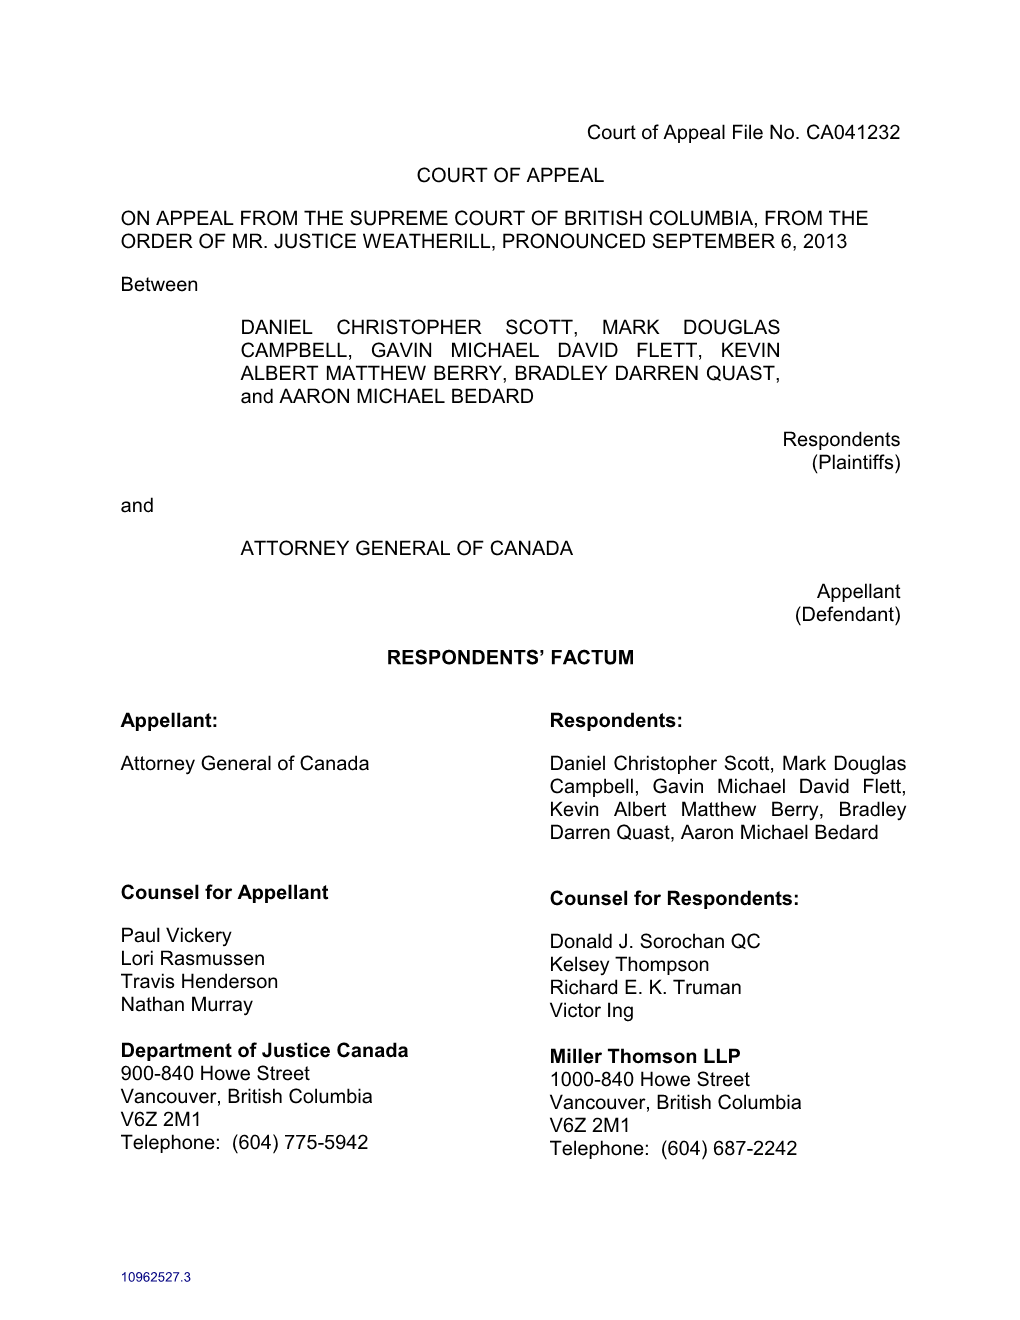 Court of Appeal File No. CA041232 COURT of APPEAL on APPEAL